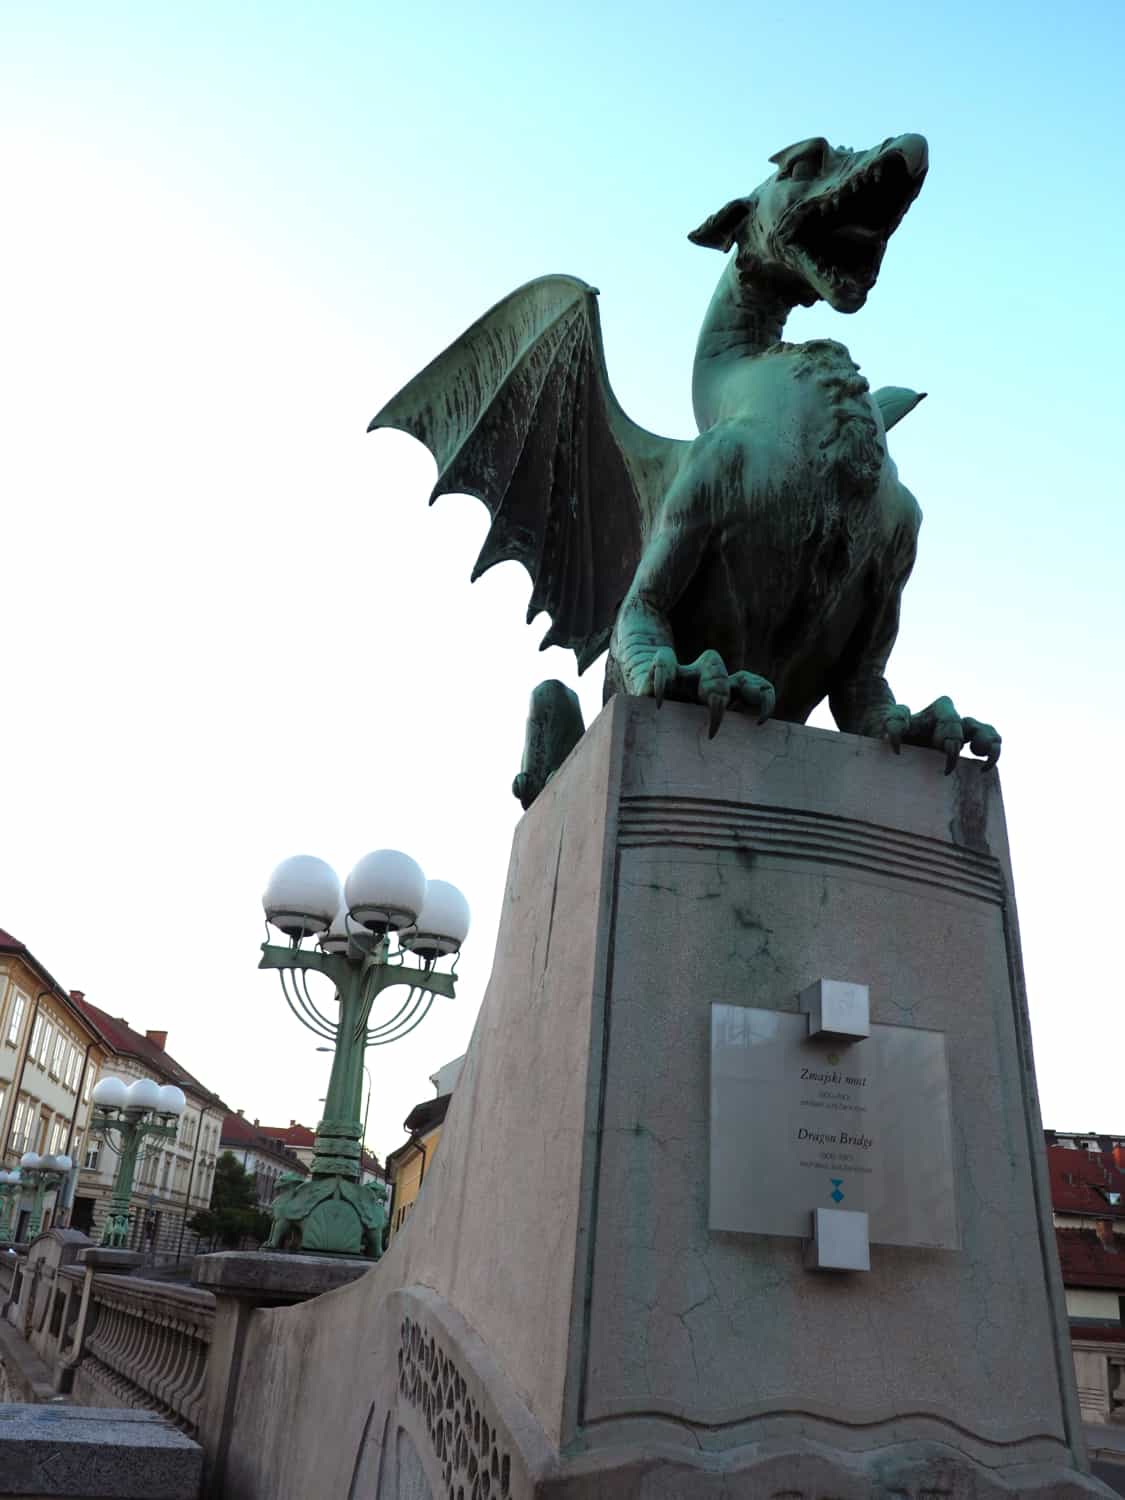 The Dragon Bridge in Slovenia: Ever heard of a guy named Jason and the argonauts? Well, part of his mythical journey led him through the Ljubljana marshes to defeat a dragon before returning the golden fleece. The dragon is a huge part of Slovenian logos! This bridge is a tribute to the myth. | via Autumn All Along